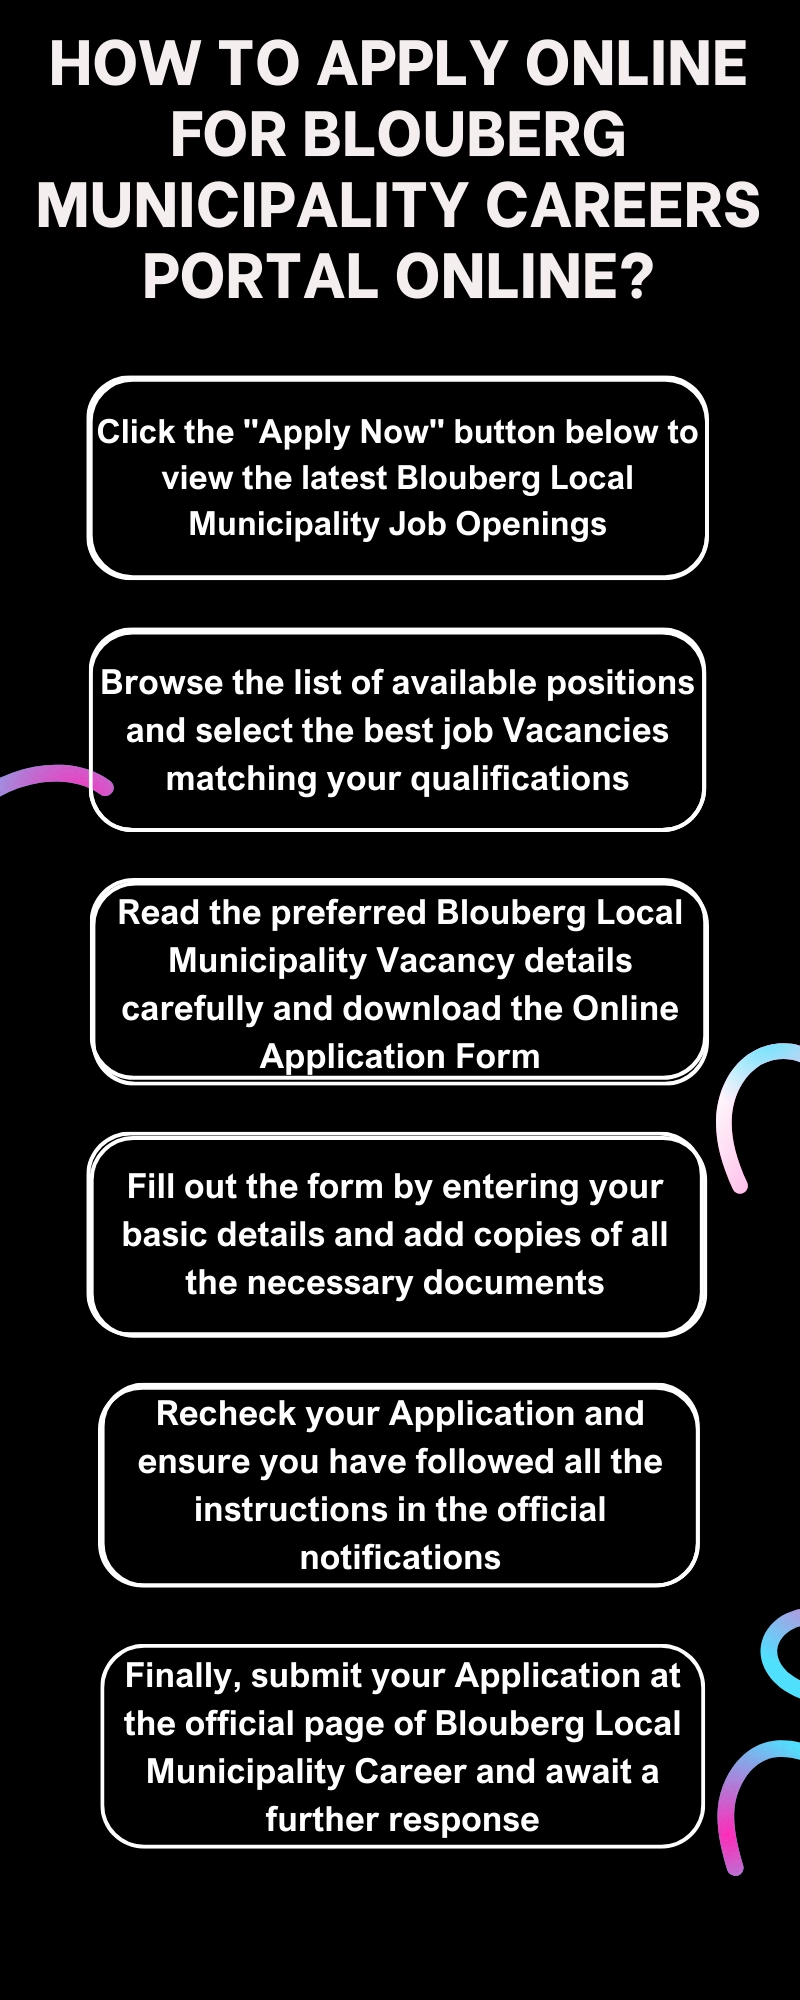 How to Apply online for Blouberg Municipality Careers Portal Online?